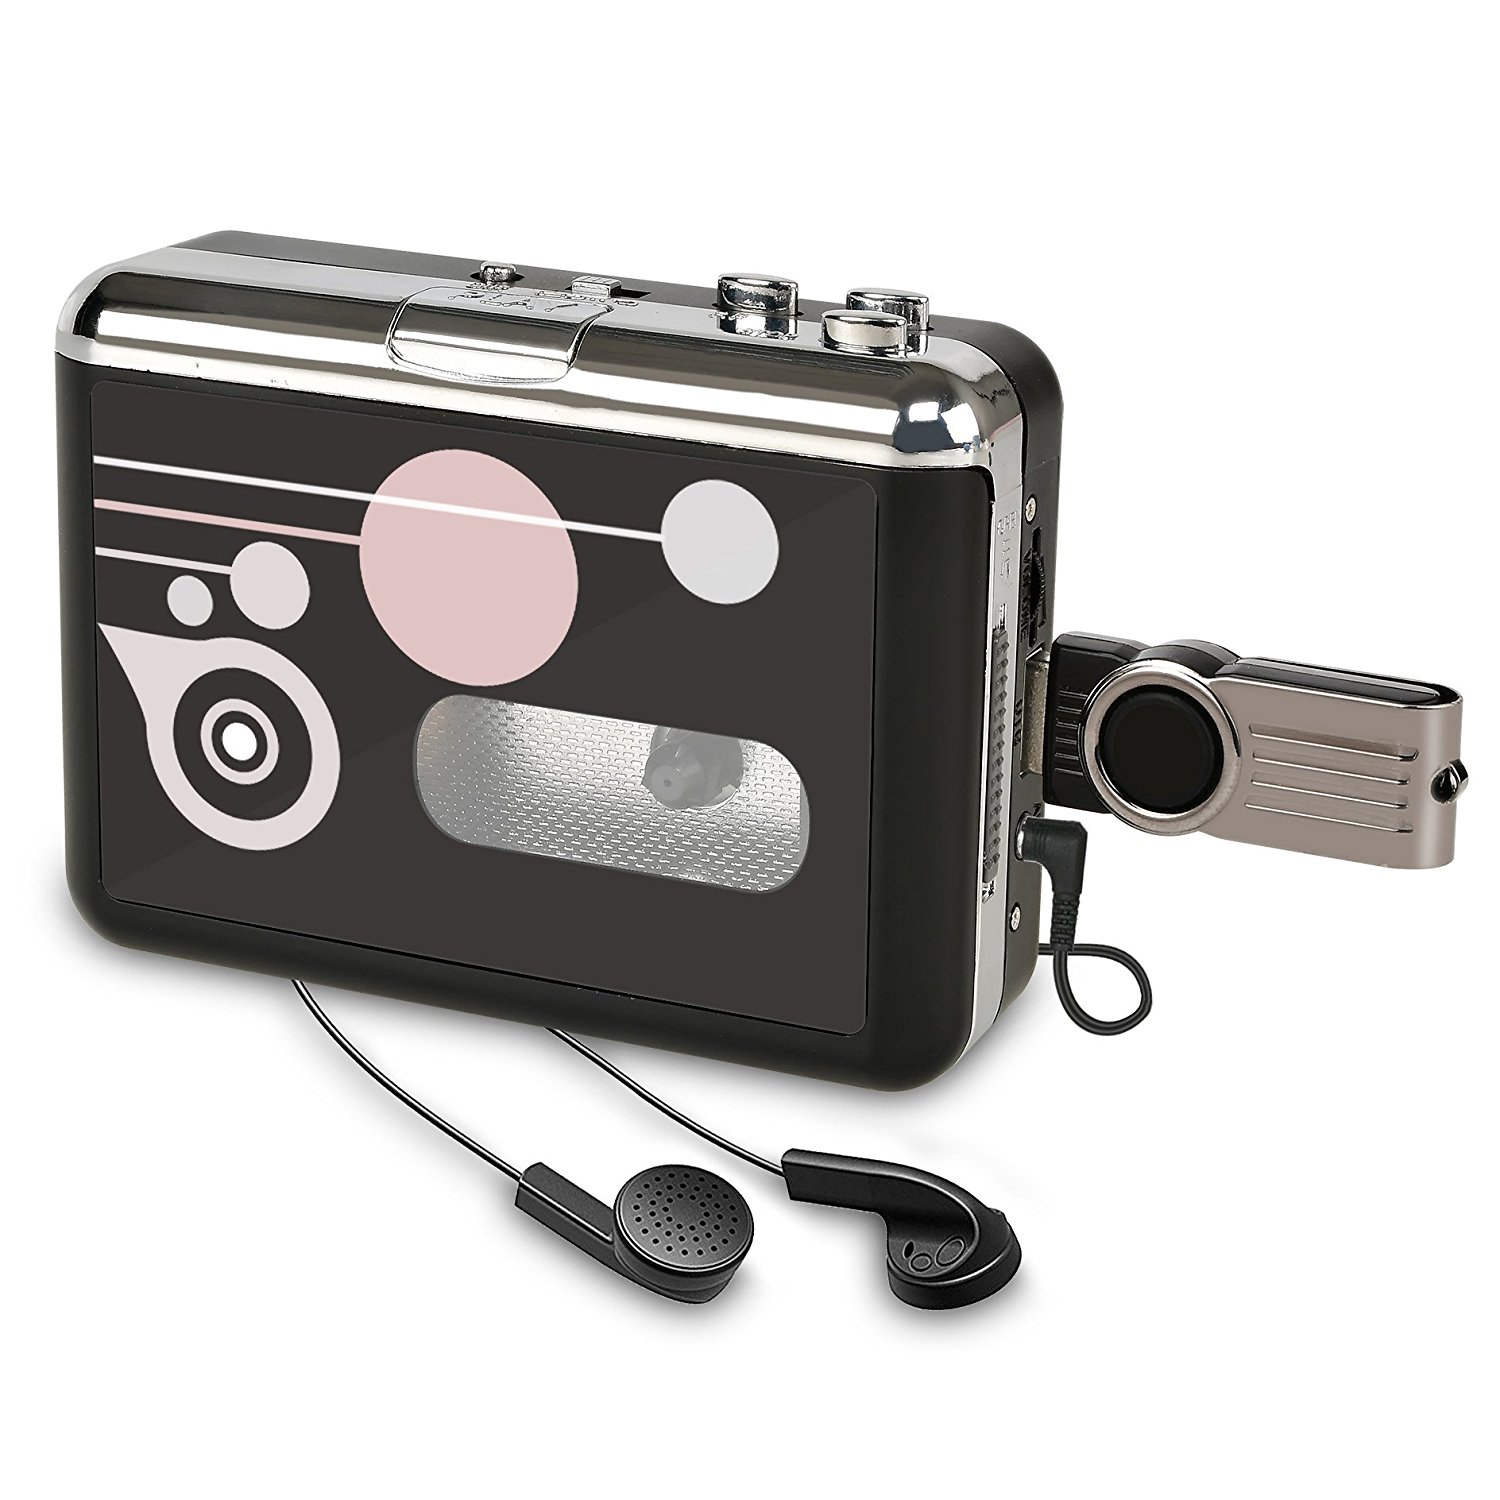 Portable Walkman Audio Music Player Cassette-to-MP3 Converter with Earphones USB Cassette Player Tape to MP3 Converter No PC Required 